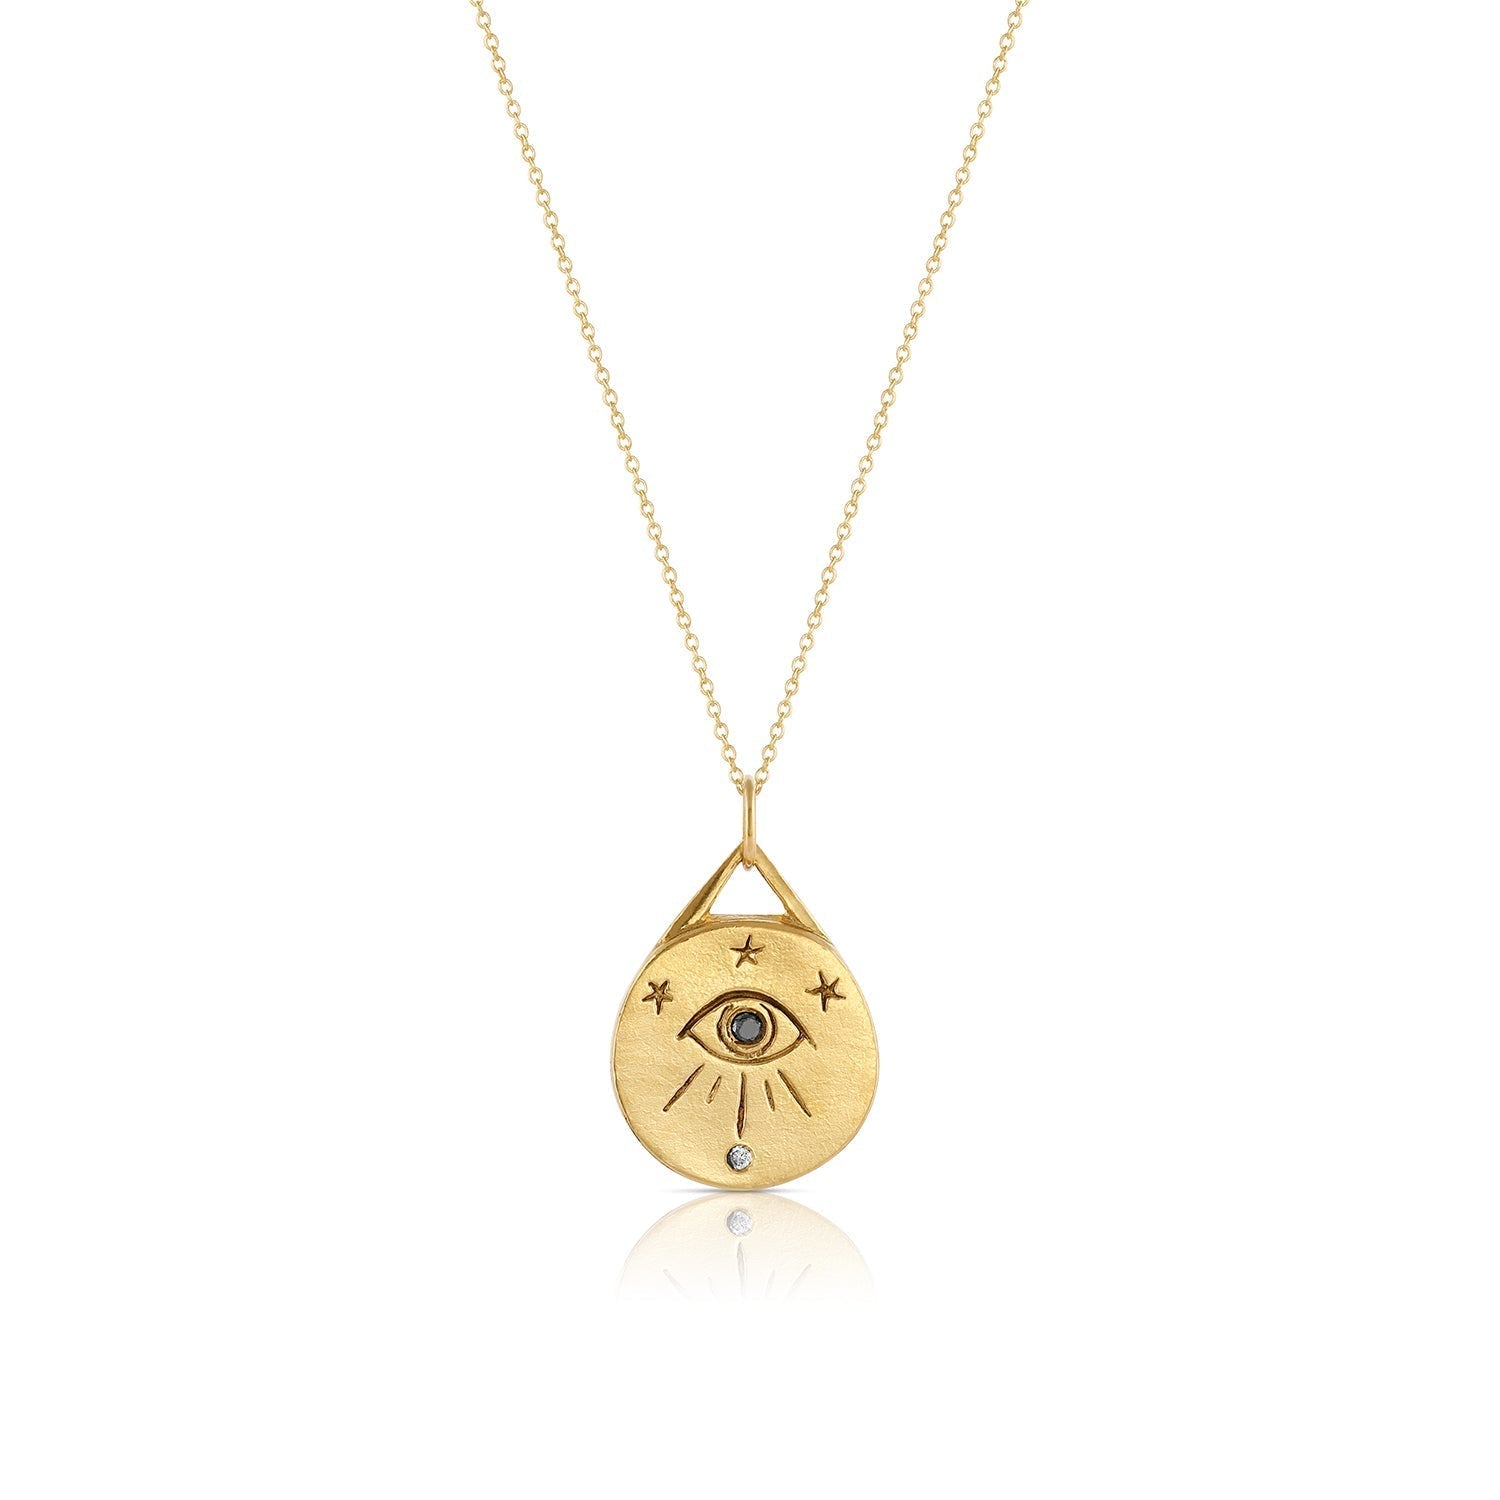 Fine Talisman Collection pendants and charms Adjustable 16 - 18 inch cable chain / 14k yellow gold Third eye diamond talisman